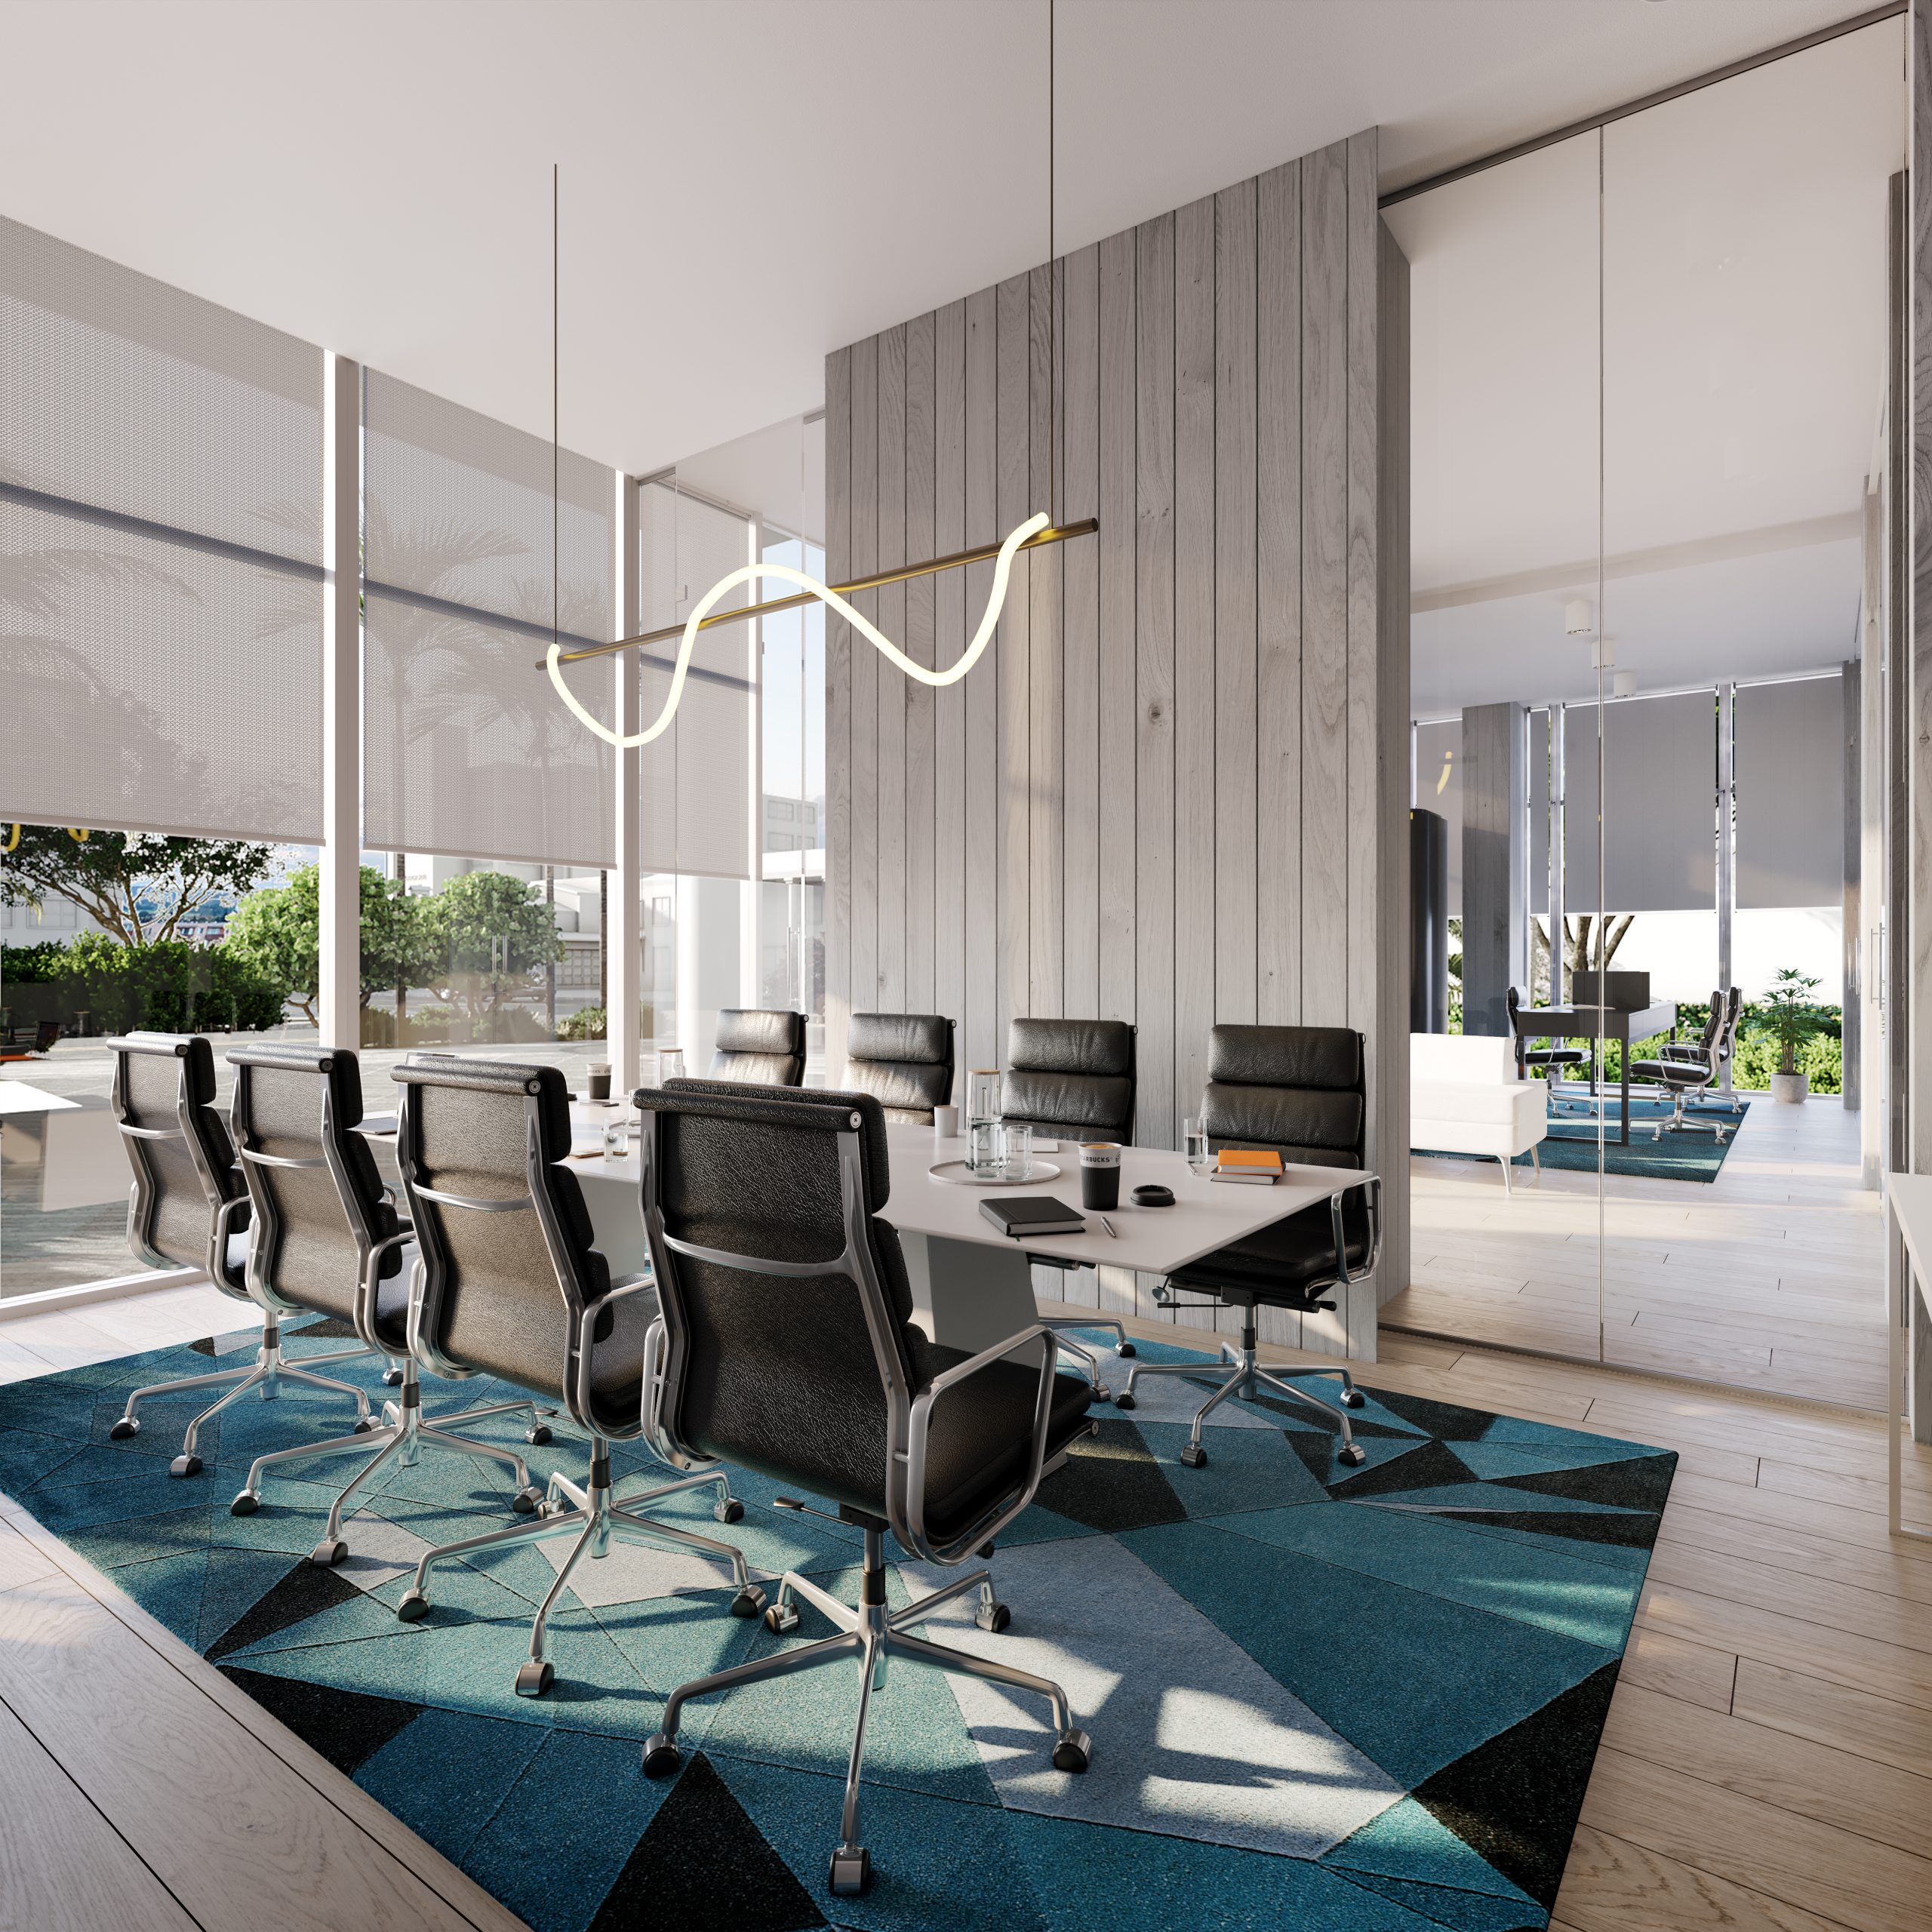 Work Share Amenity Space. Rendering courtesy of Evolution Virtual.